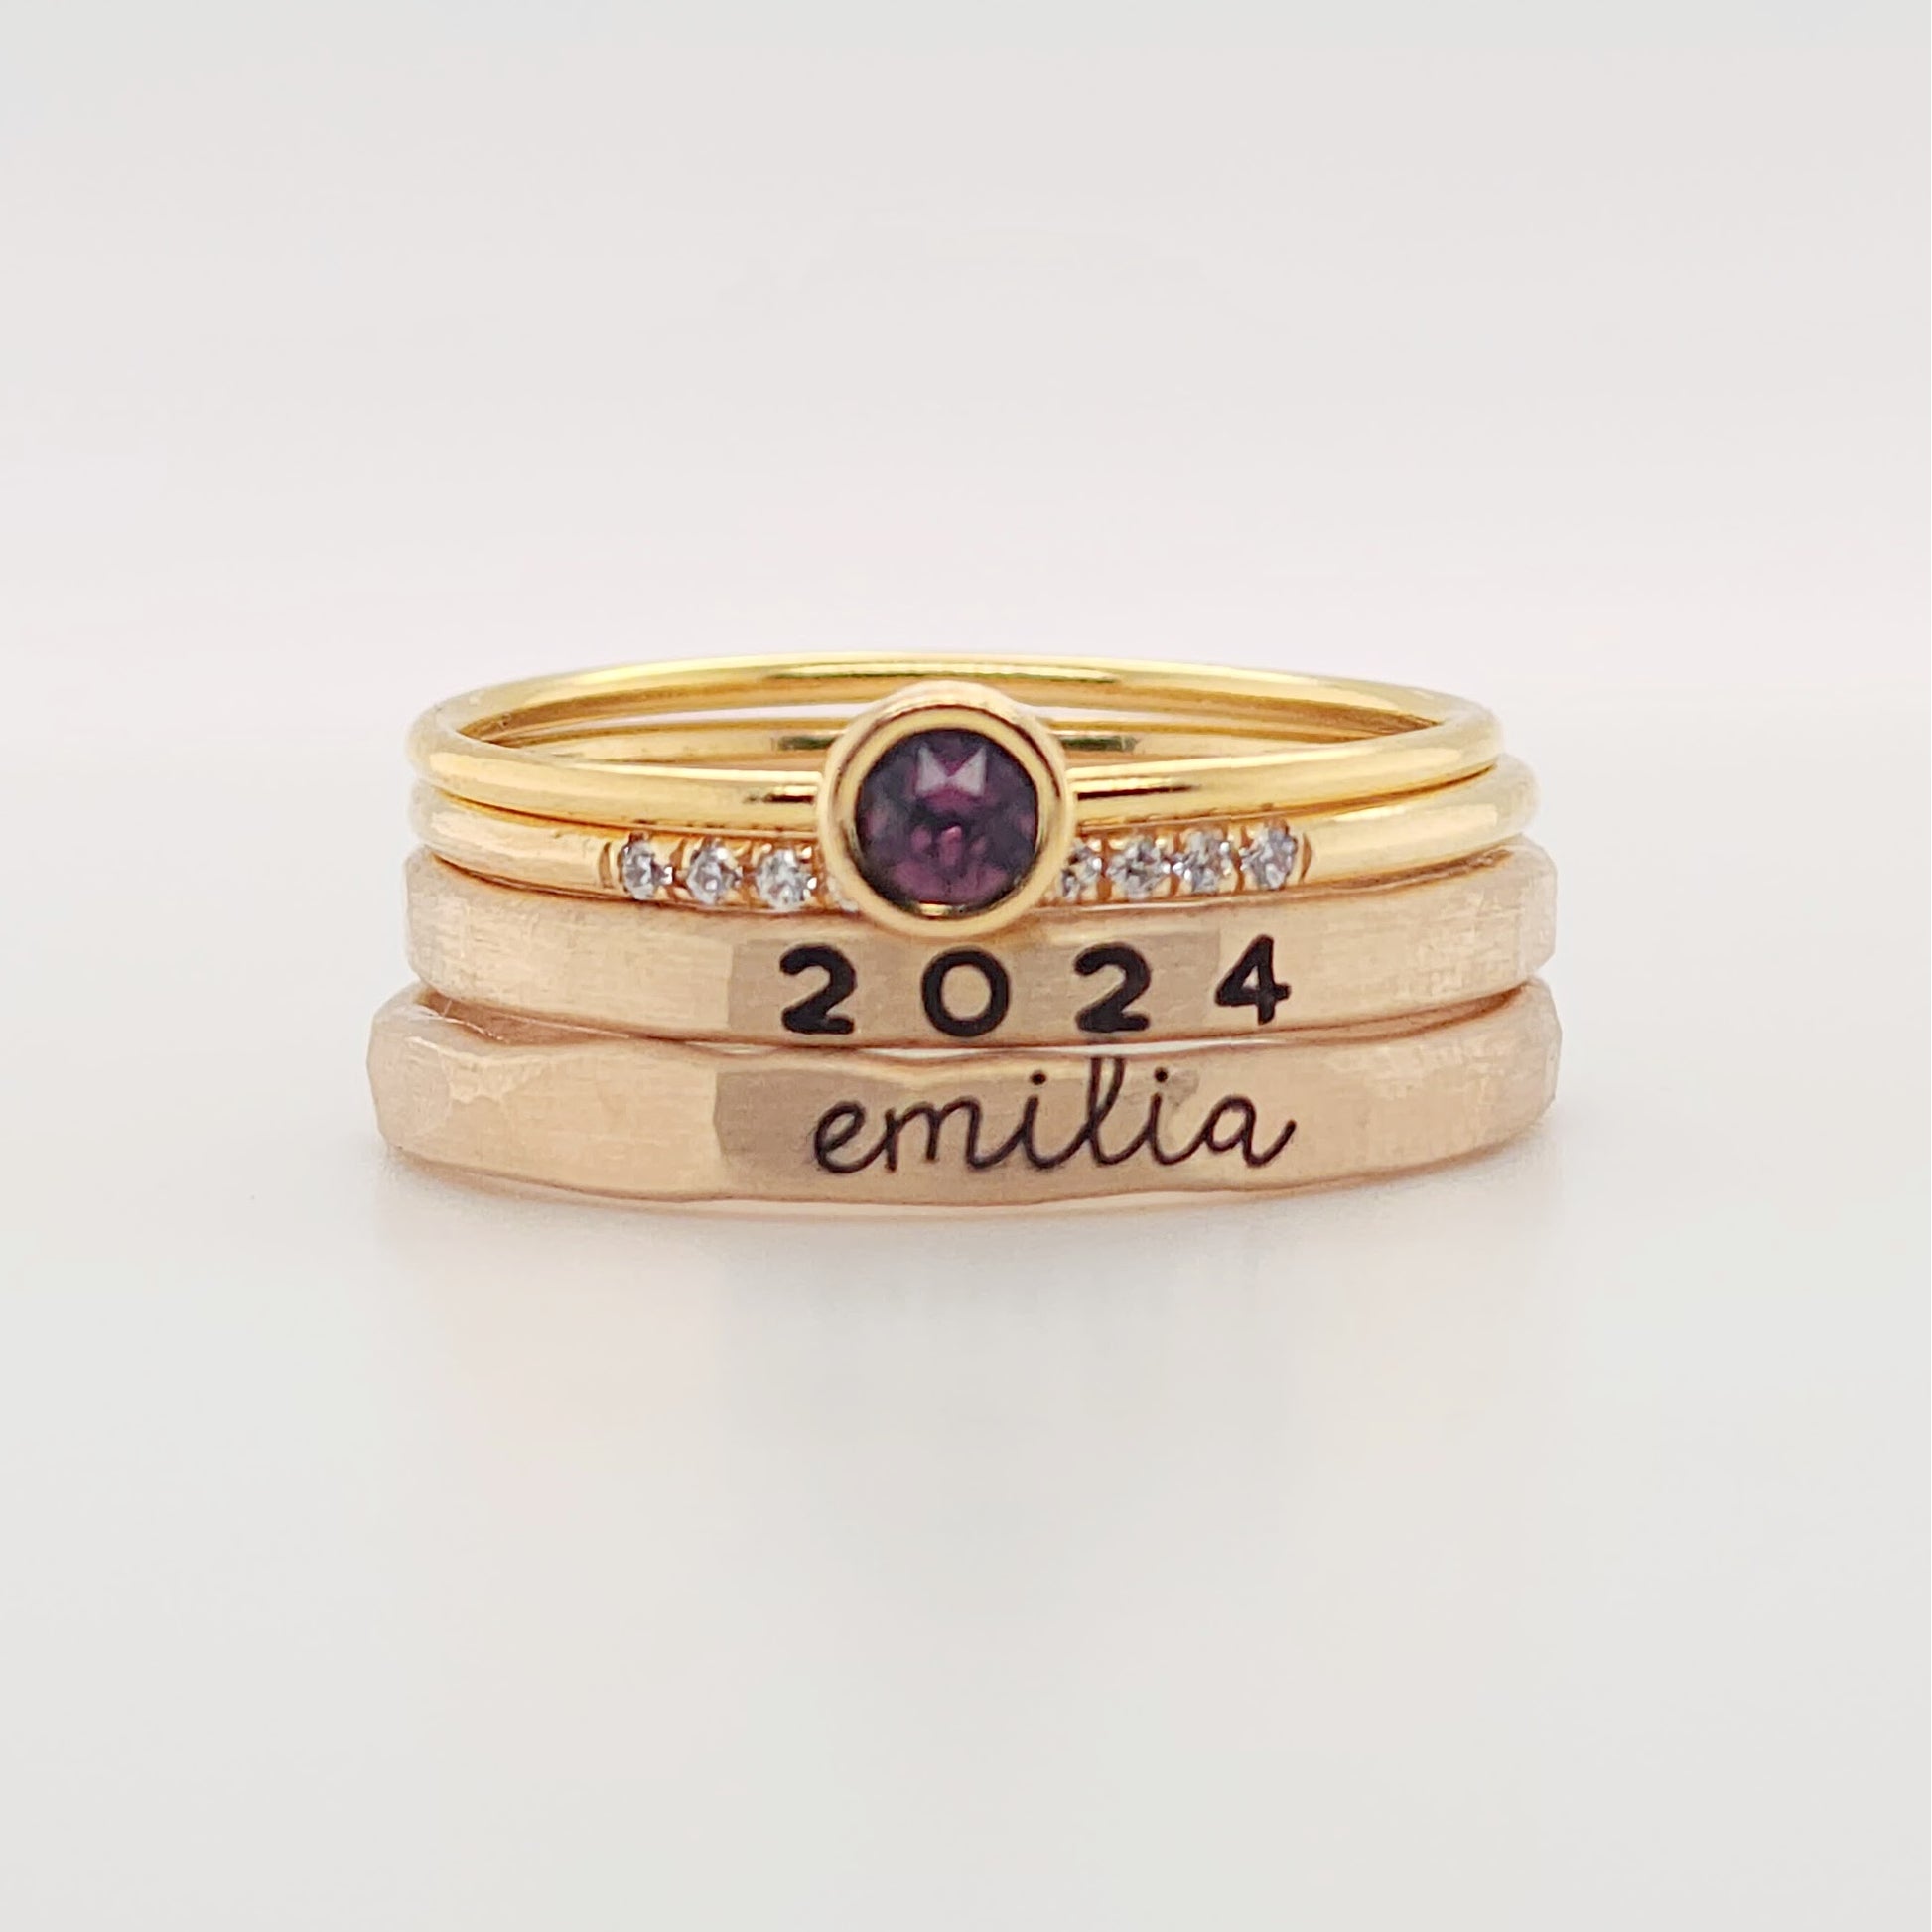 4mm Birthstone Stacking Ring - Going Golden